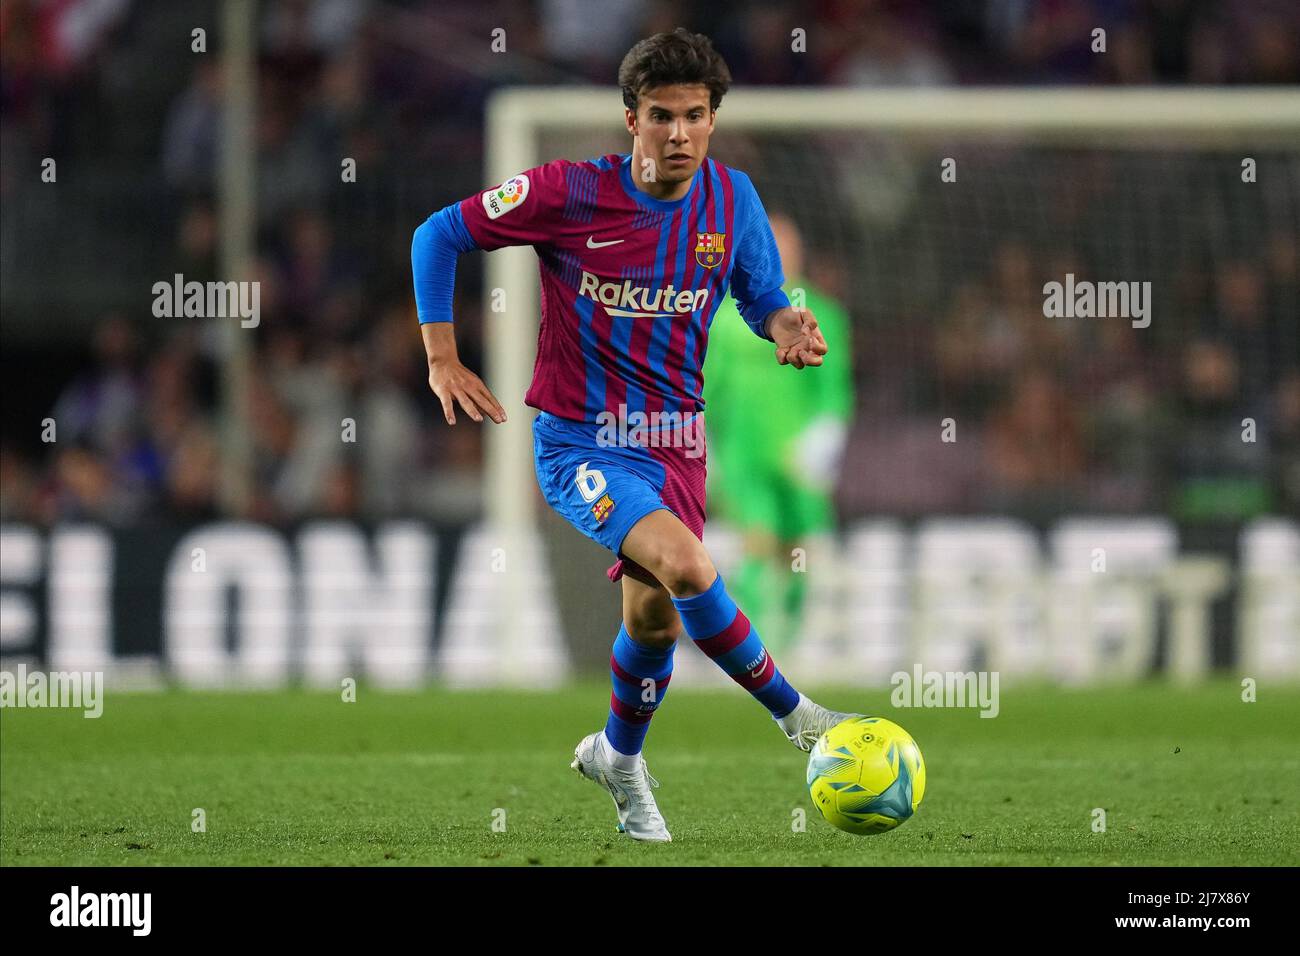 Barcelona, Spain, May 10, 2022, Riqui Puig of FC Barcelona during the La Liga match between FC Barcelona and RC Celta played at Camp Nou Stadium on May 10, 2022 in Barcelona, Spain. (Photo by Sergio Ruiz / PRESSINPHOTO) Stock Photo